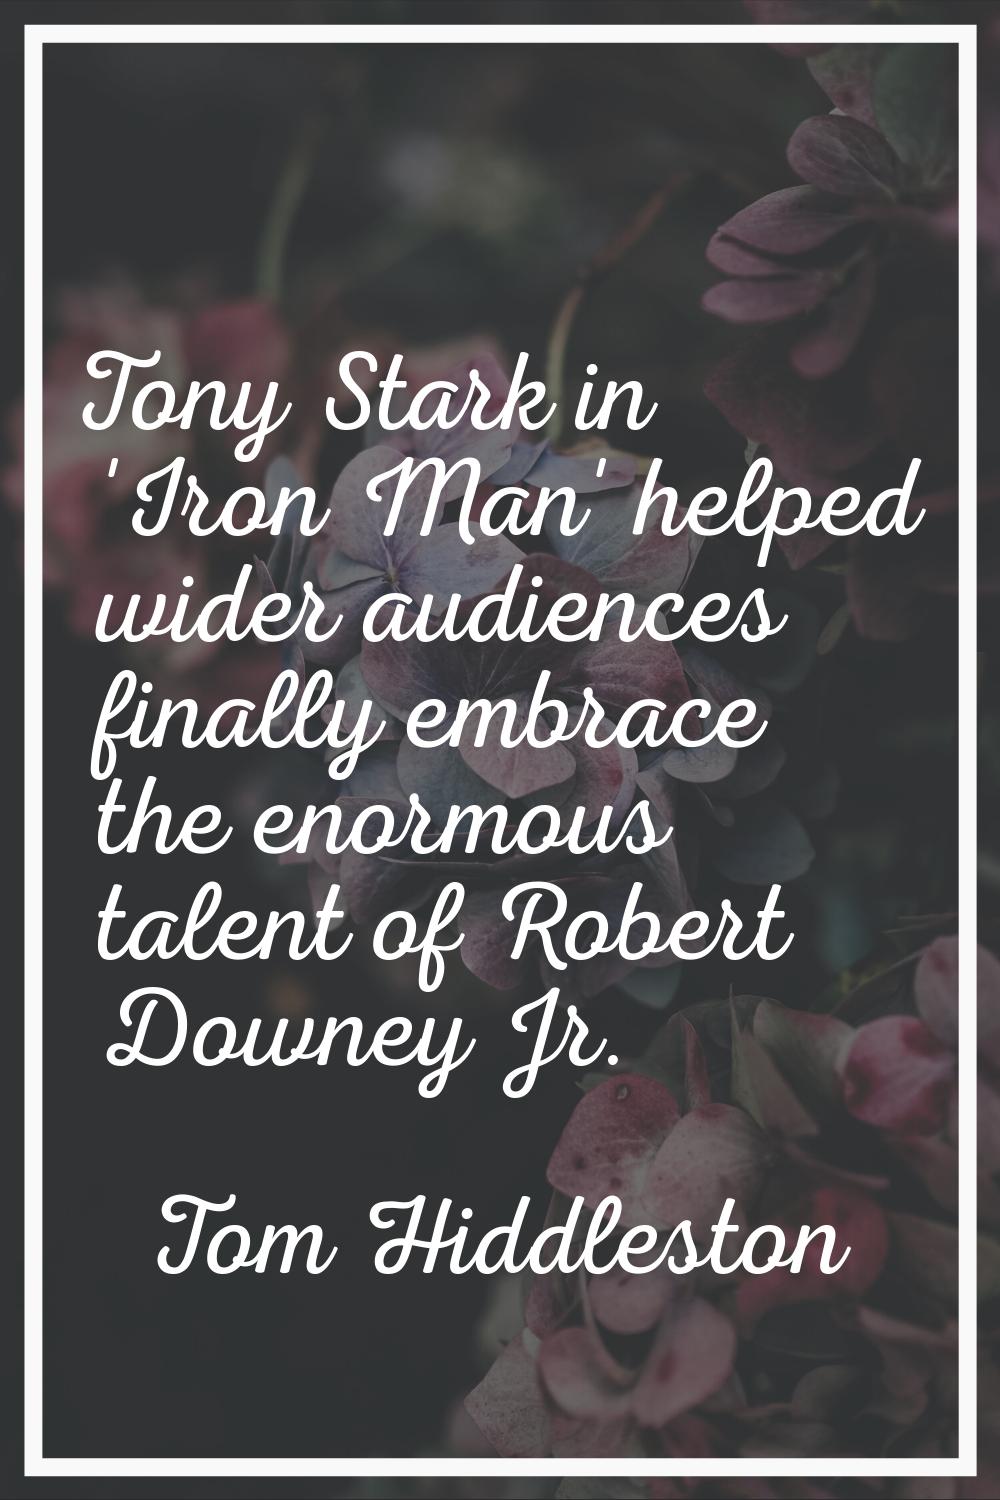 Tony Stark in 'Iron Man' helped wider audiences finally embrace the enormous talent of Robert Downe